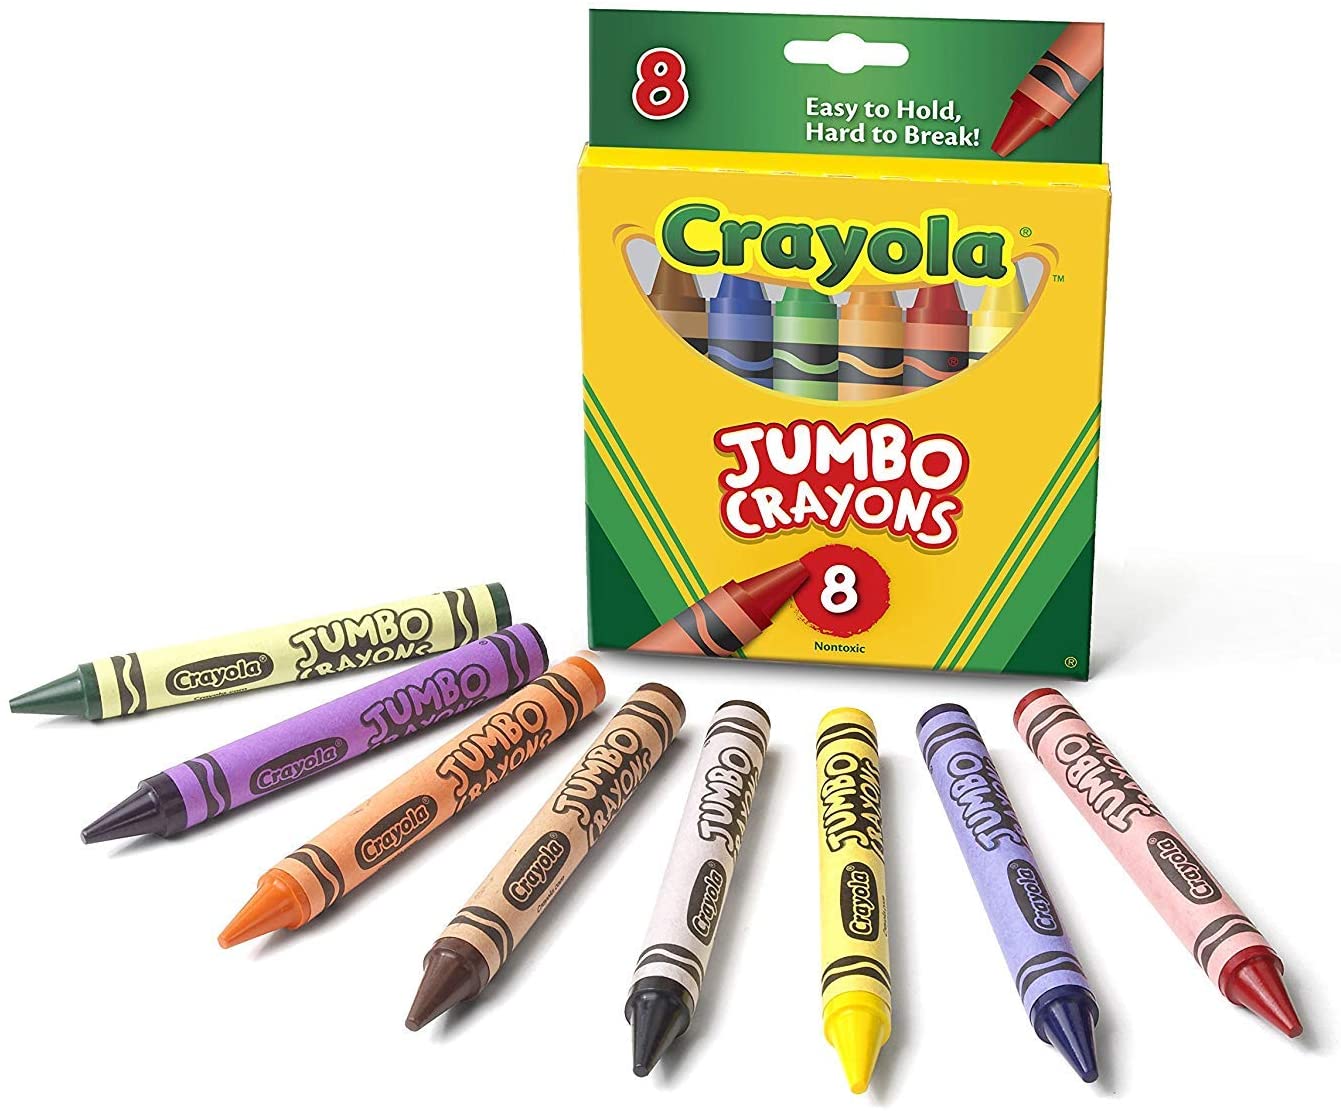 Colorations Chubby Crayons for Kids Set of 200 Rainbow Crayons